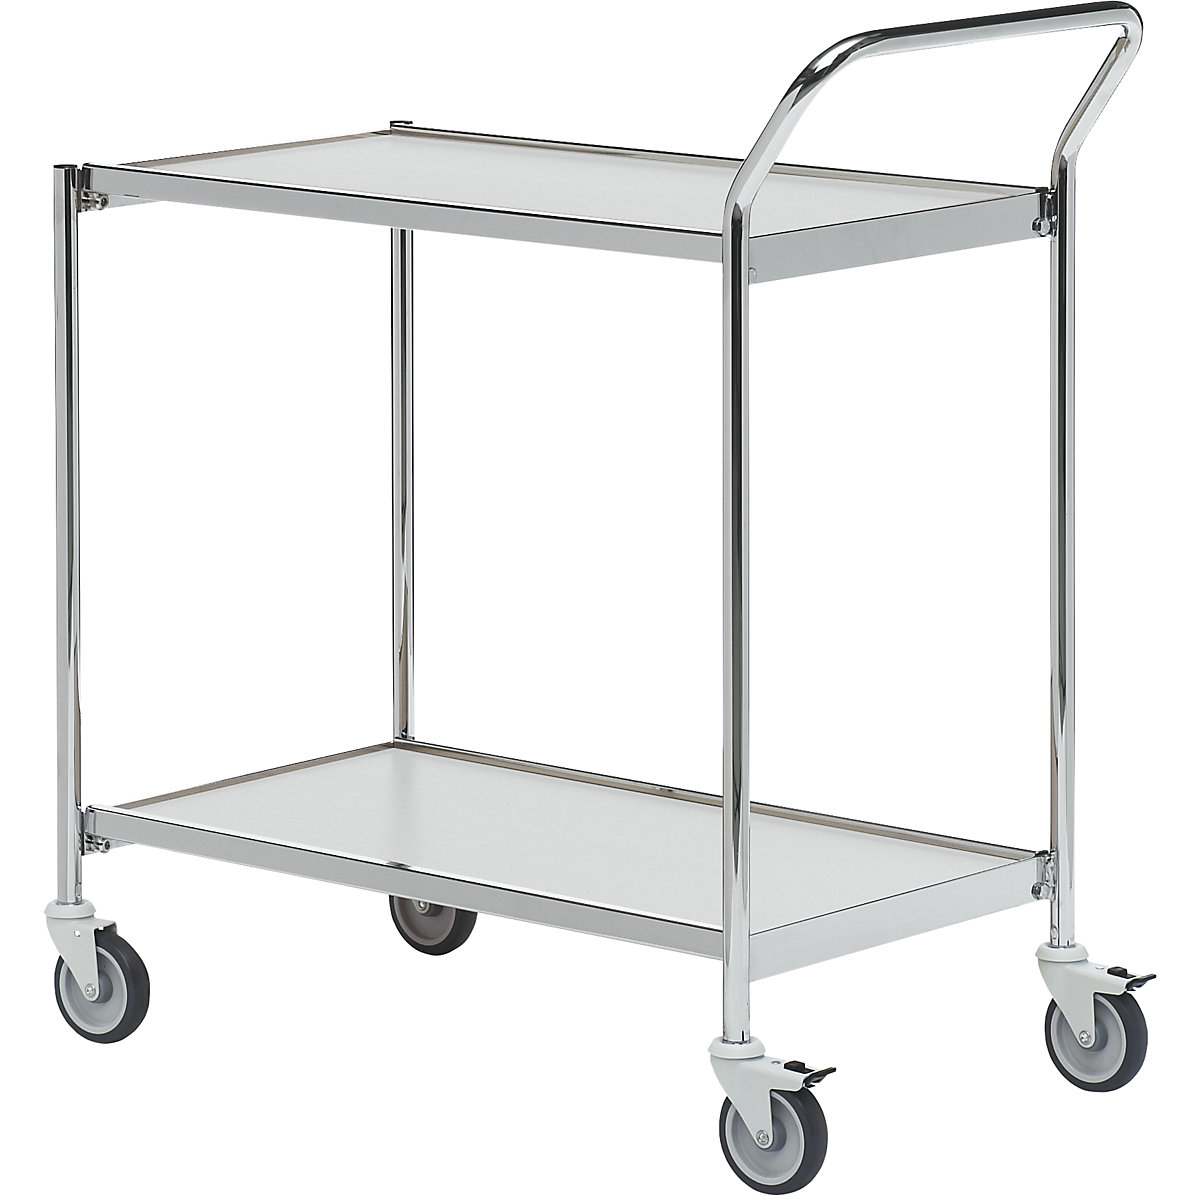 Table trolley – HelgeNyberg, 2 shelves, LxW 800 x 420 mm, chrome/grey, 5+ items-7